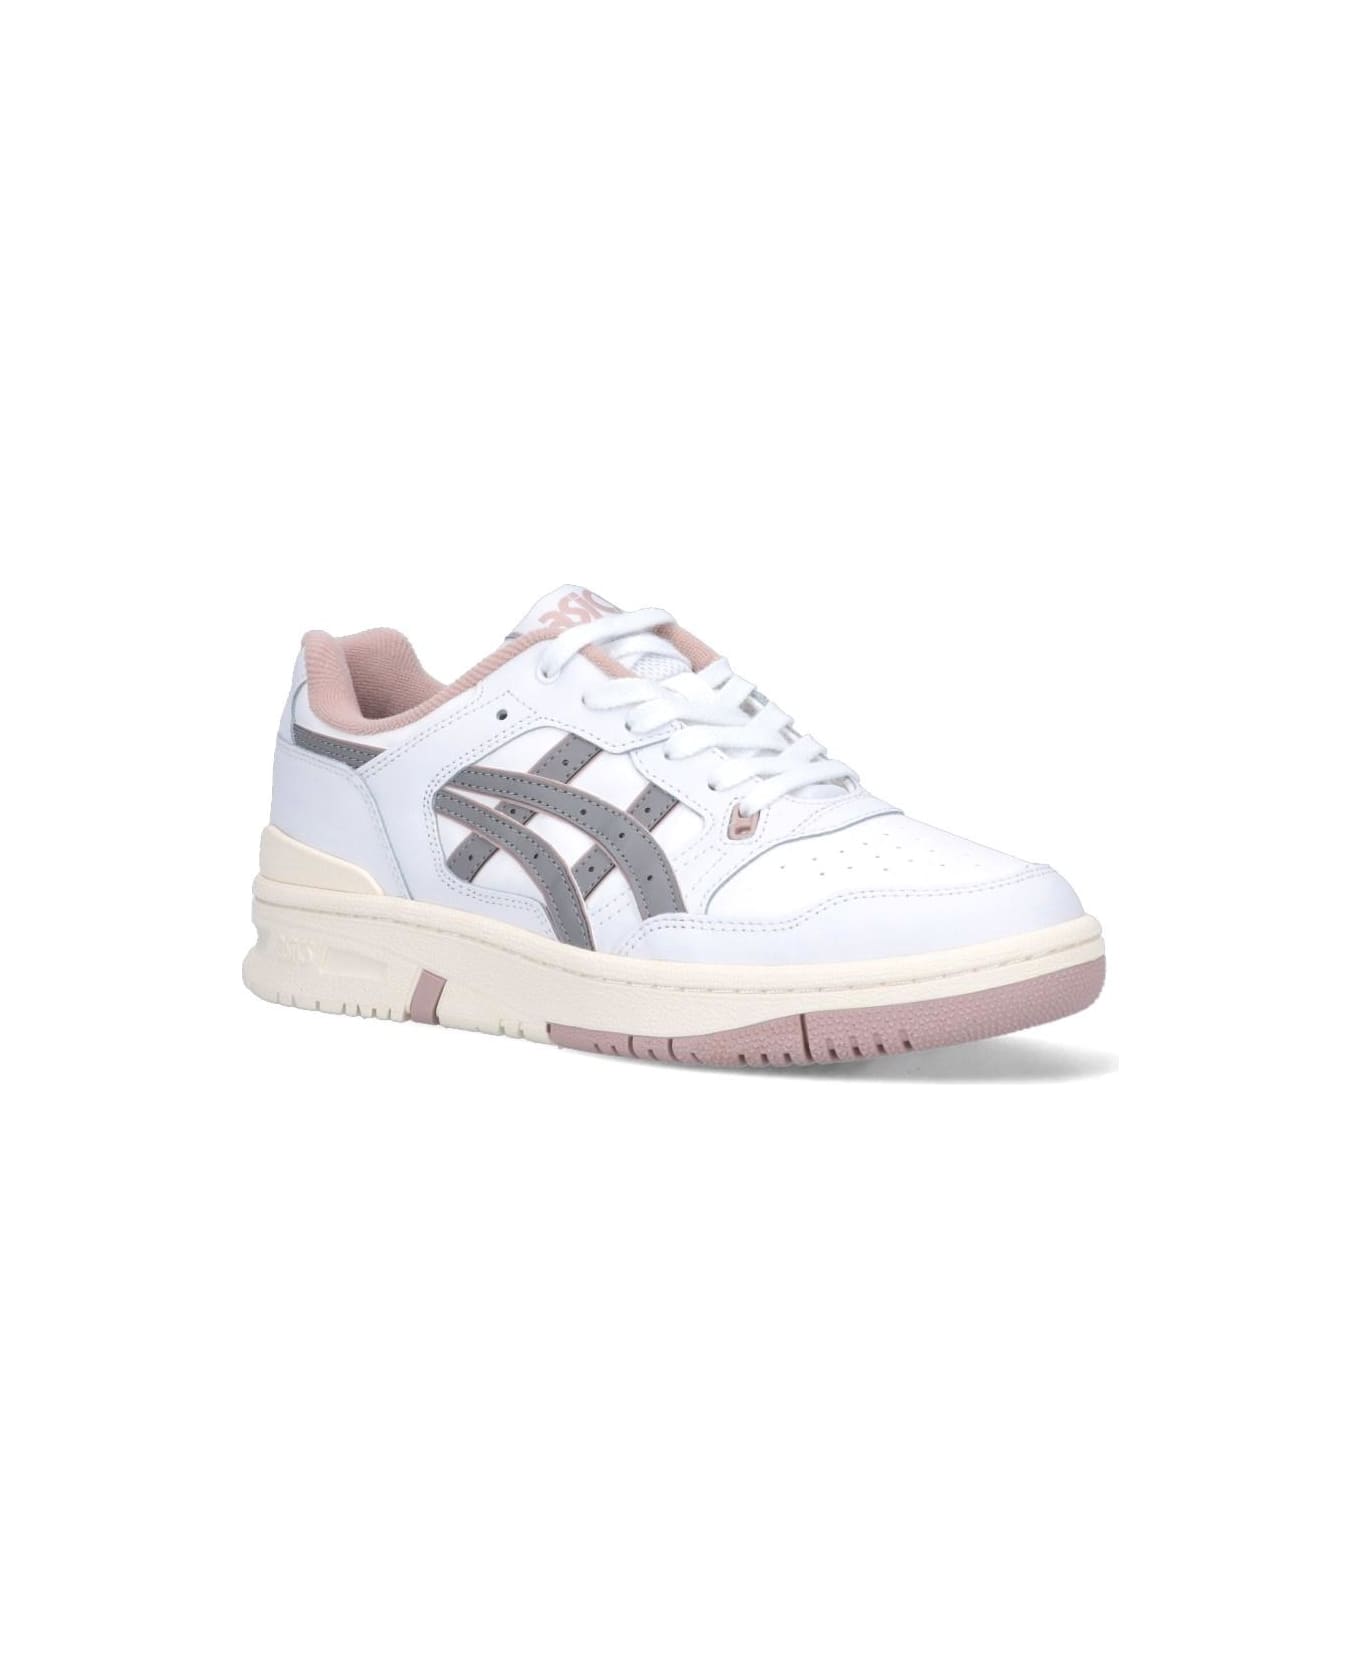 Asics Ex89 Sneakers - White/clay Grey